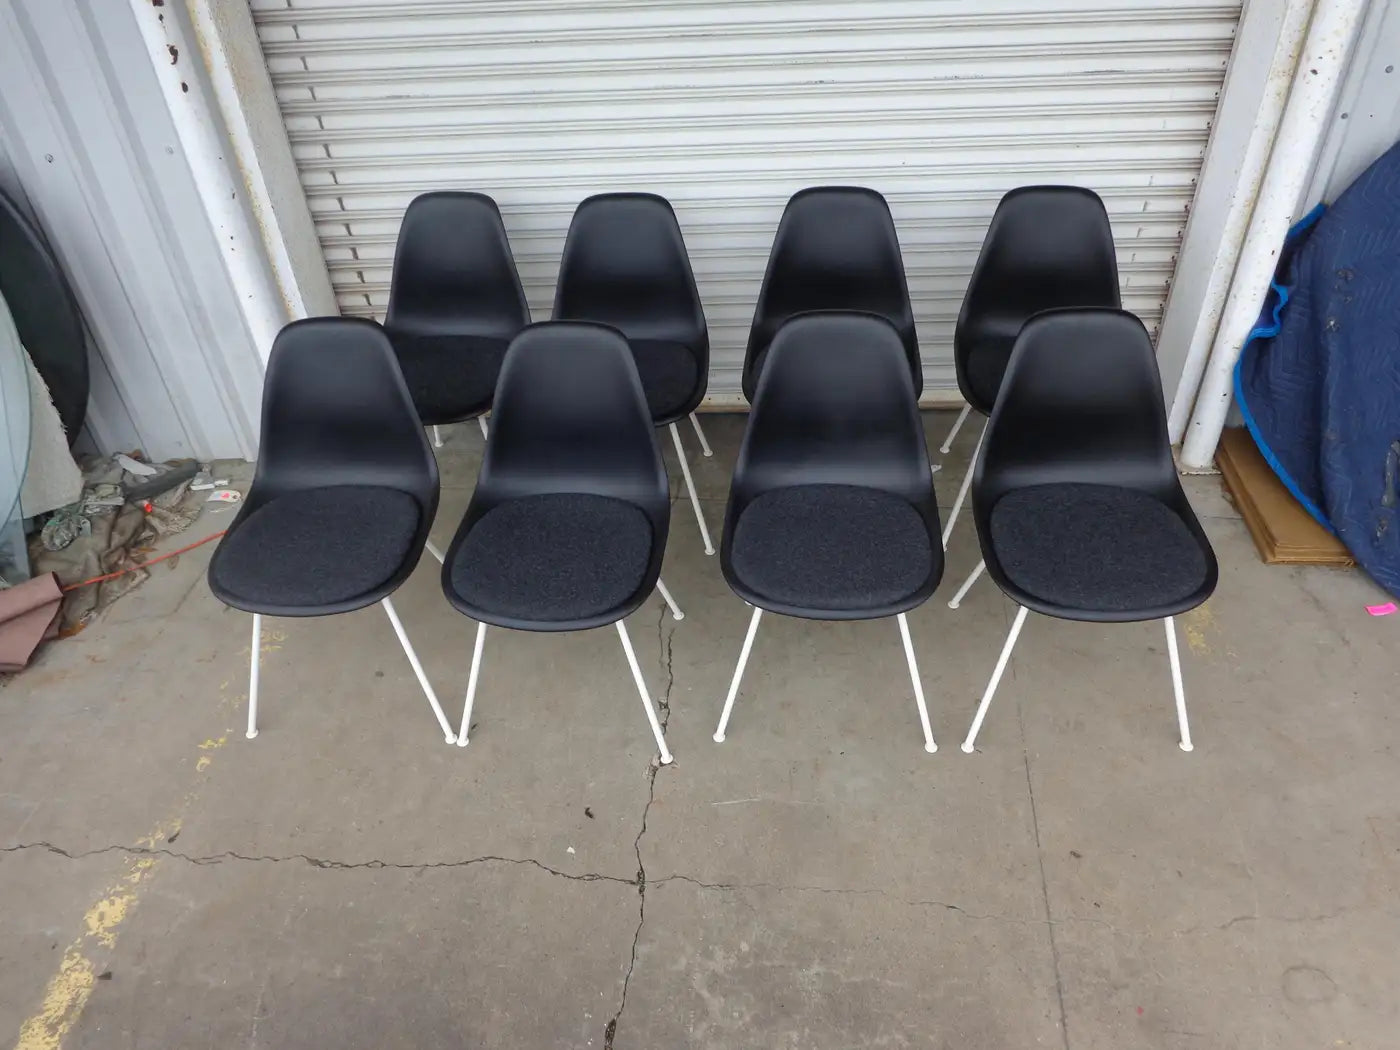 Herman Miller Eames side chair (120 available)